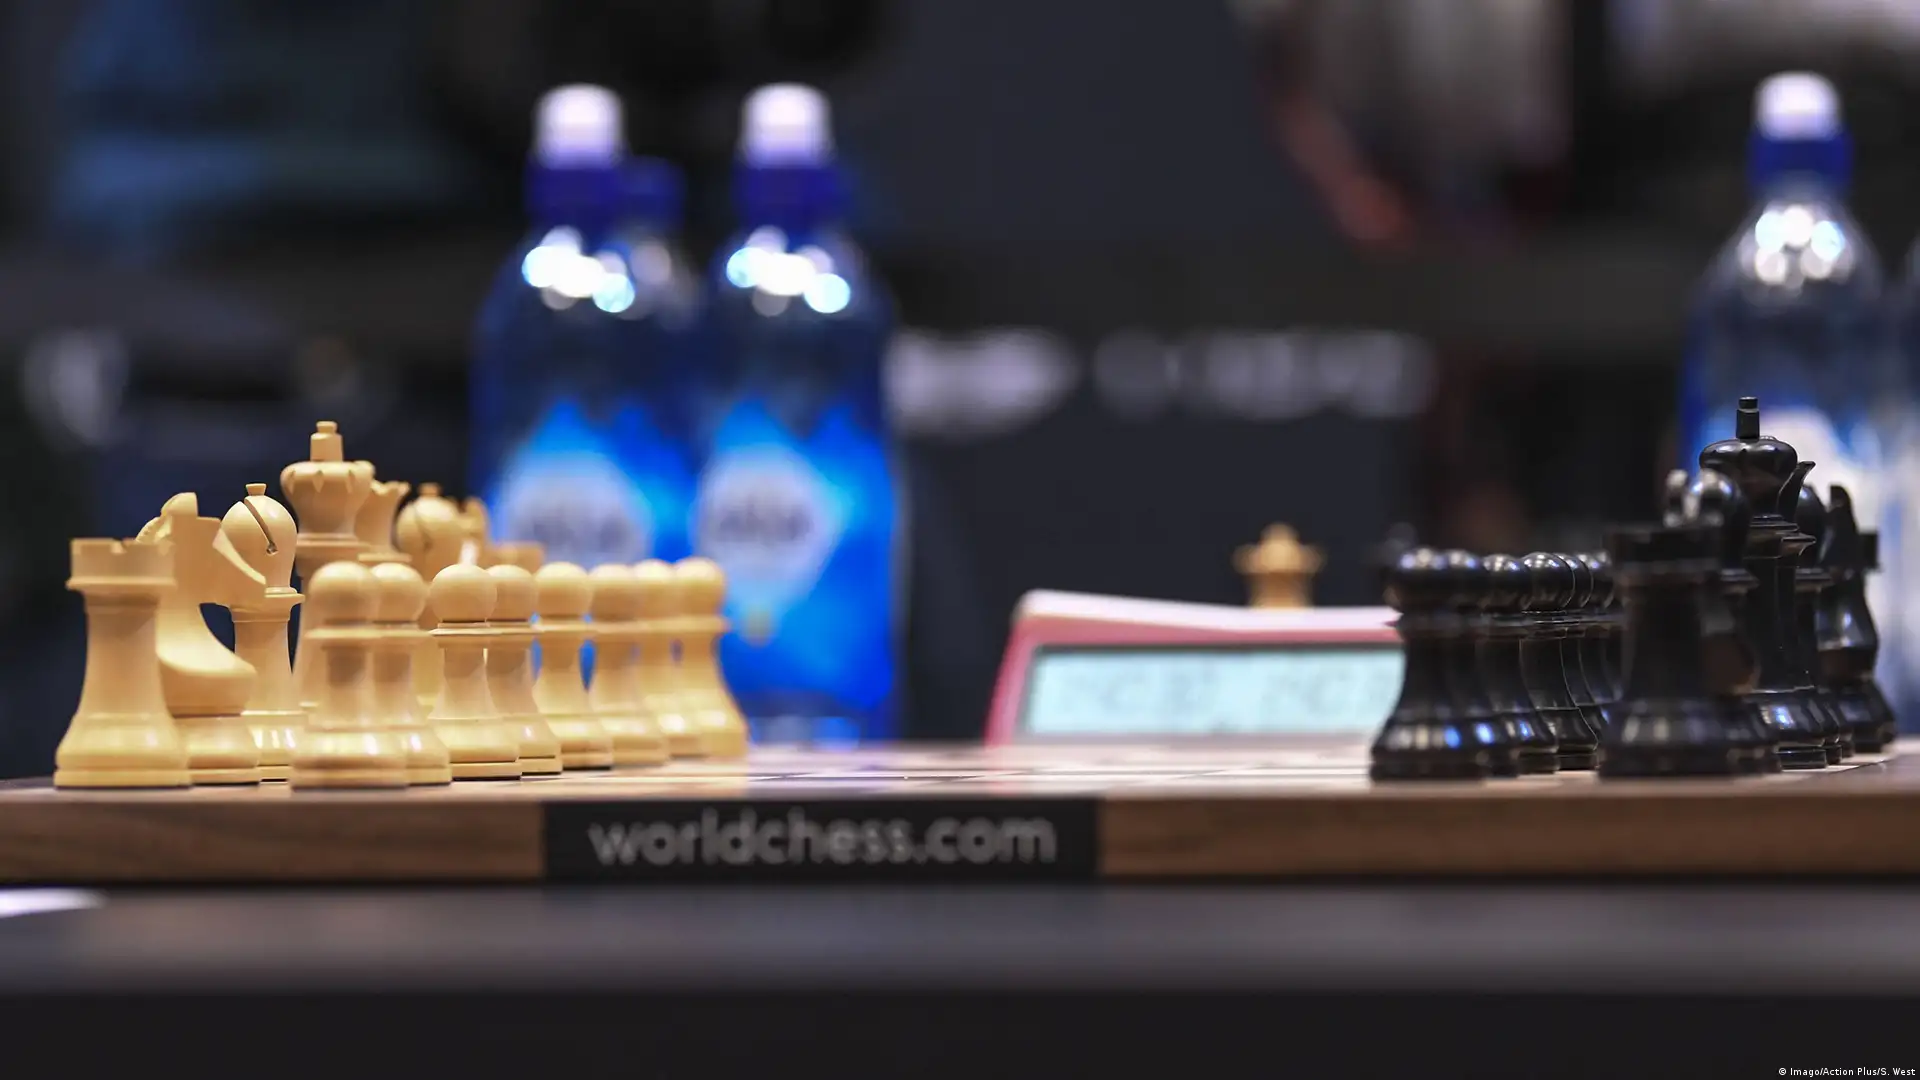 Record: The longest World Chess Championship Game in History